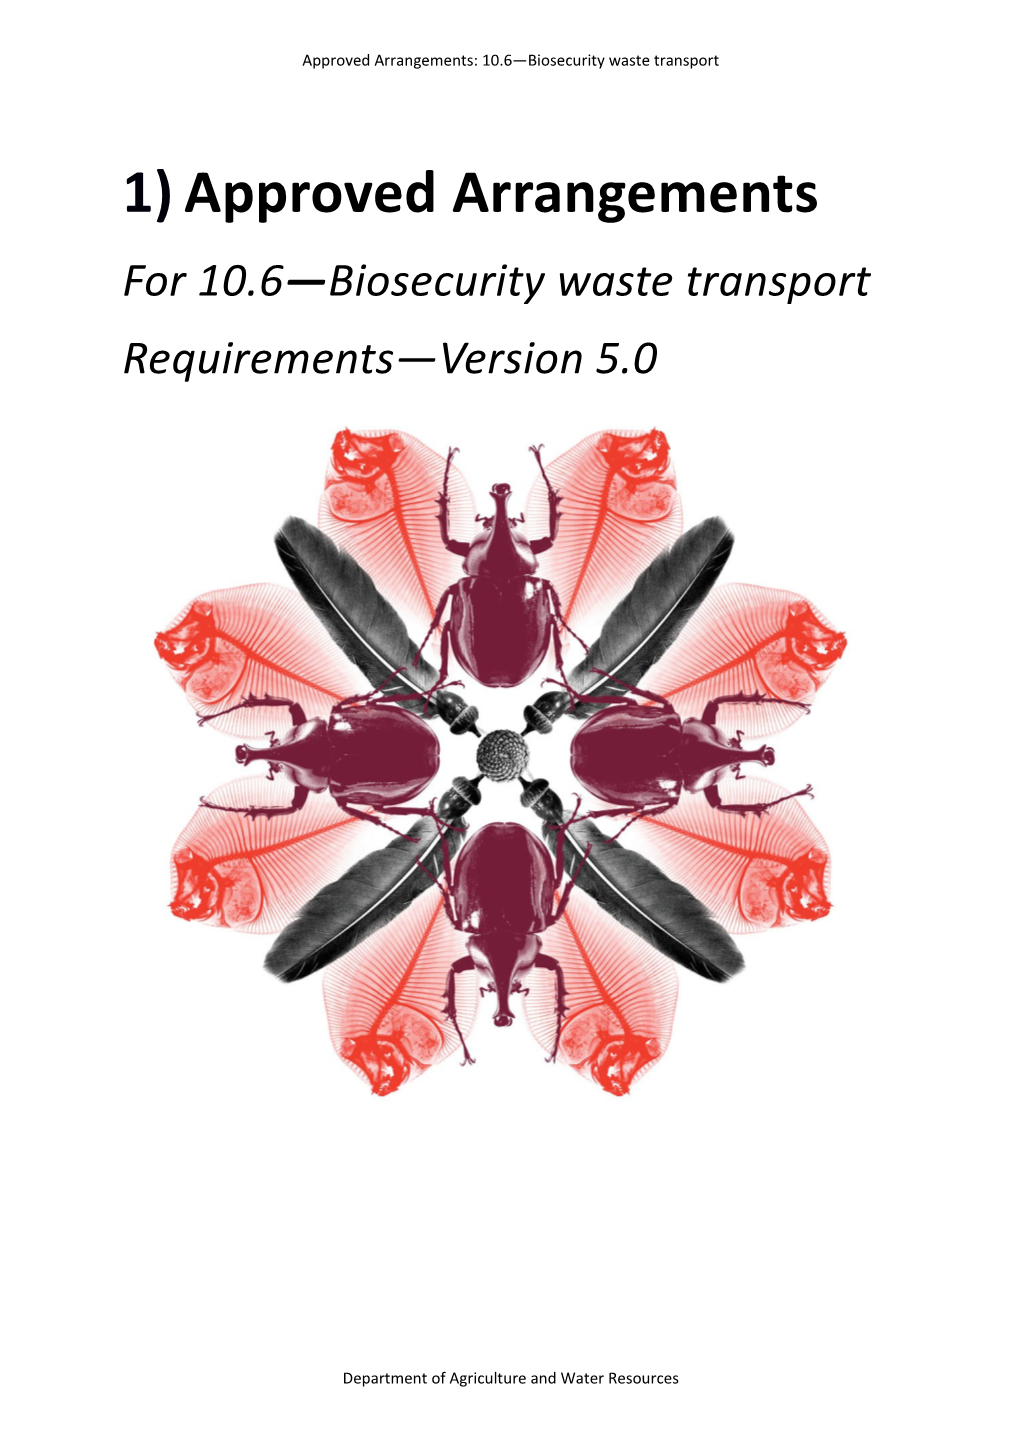 AA for Biosecurity Waste Transport - Requirements